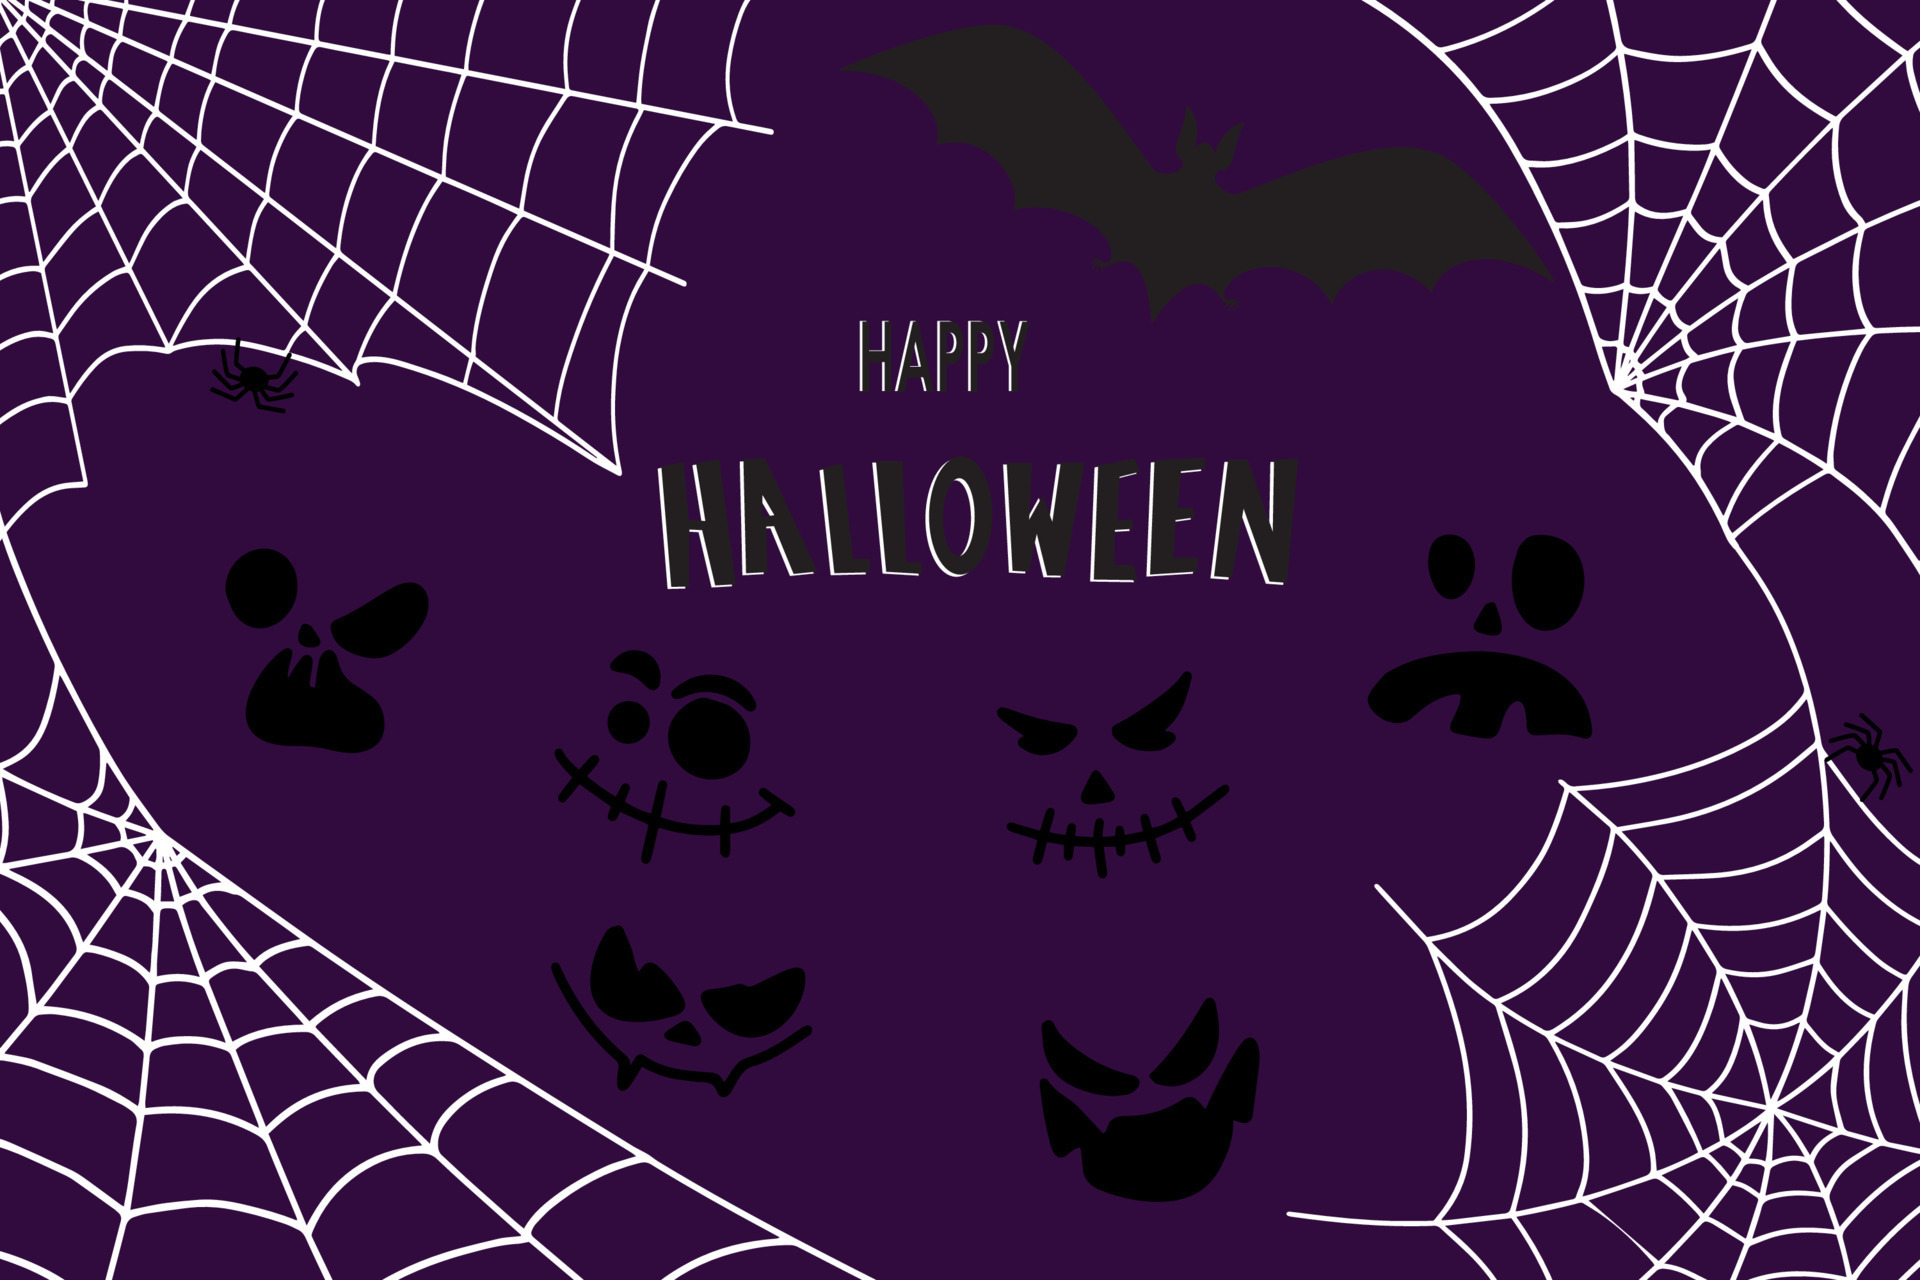 https://static.vecteezy.com/system/resources/previews/013/339/266/original/bat-net-and-pumpkins-halloween-background-with-bat-and-hand-drawn-pumpkins-black-and-white-background-vector.jpg